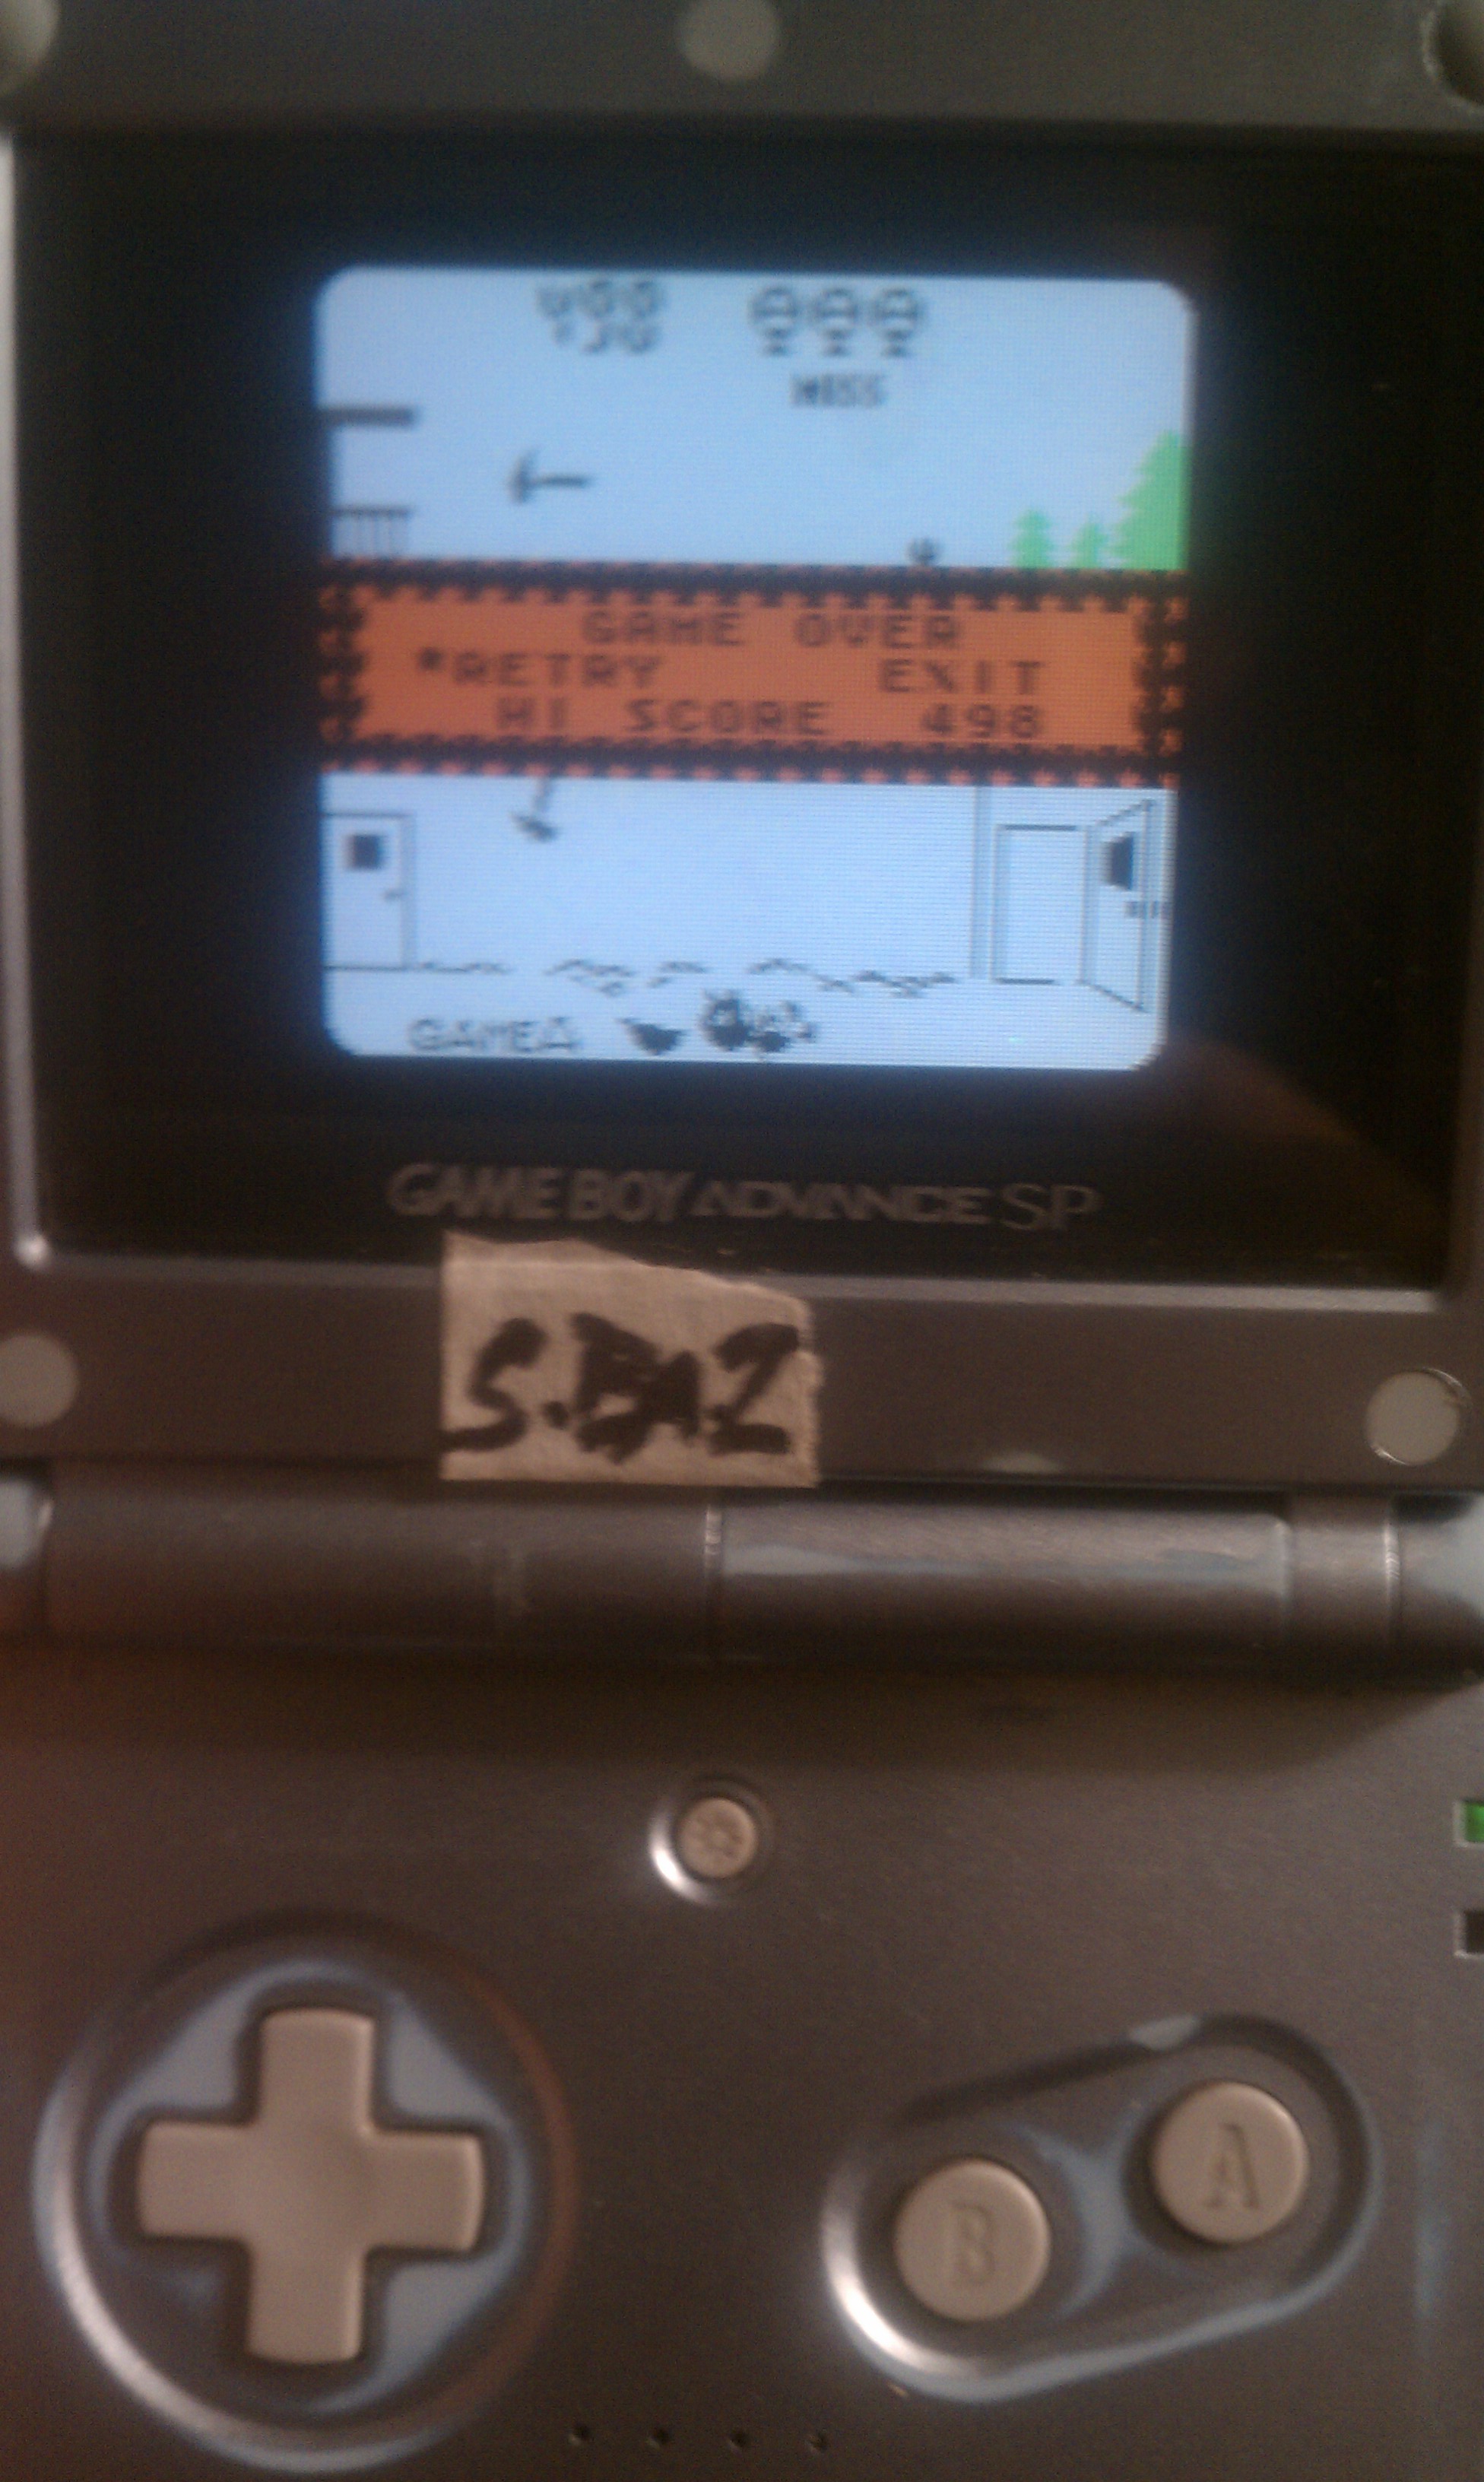 S.BAZ: Game & Watch Gallery 2: Helmet: Classic: Easy (Game Boy Color) 498 points on 2016-06-25 14:48:30